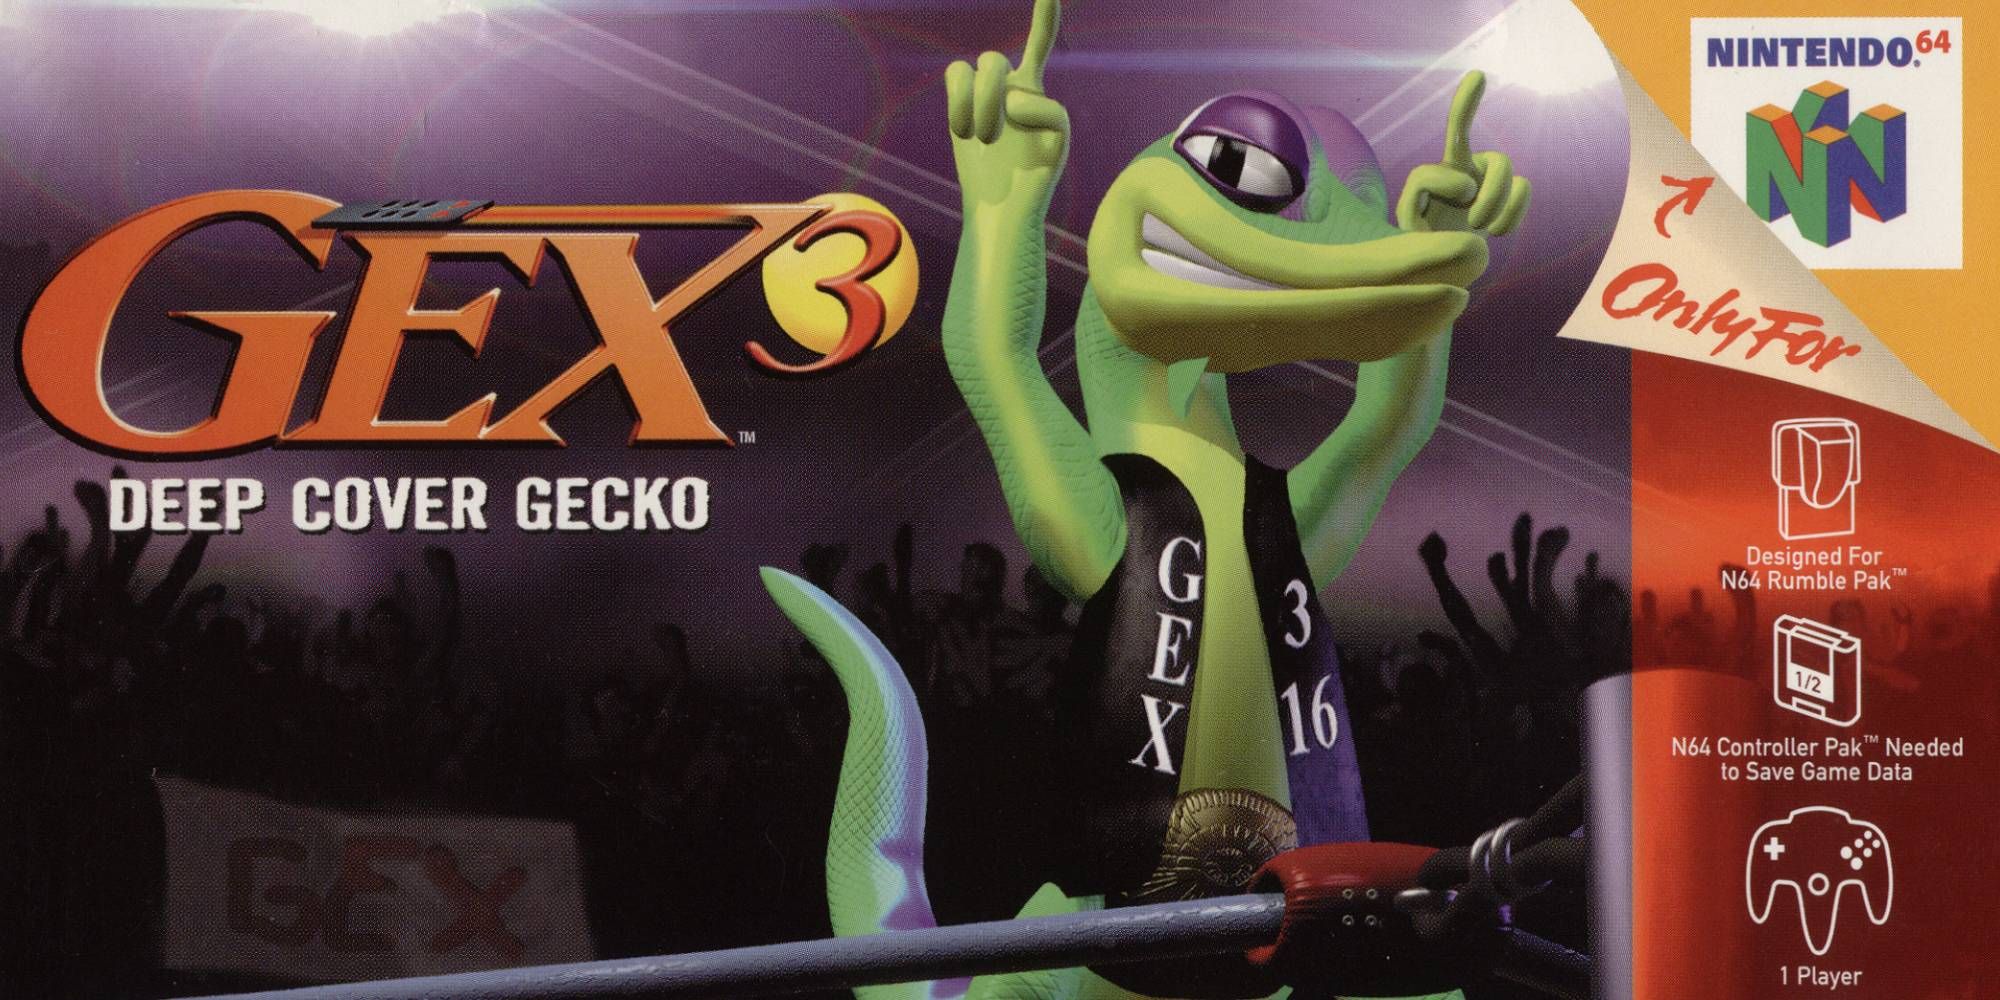 Anthropomorphic green gecko poses in Jex's wrestling ring